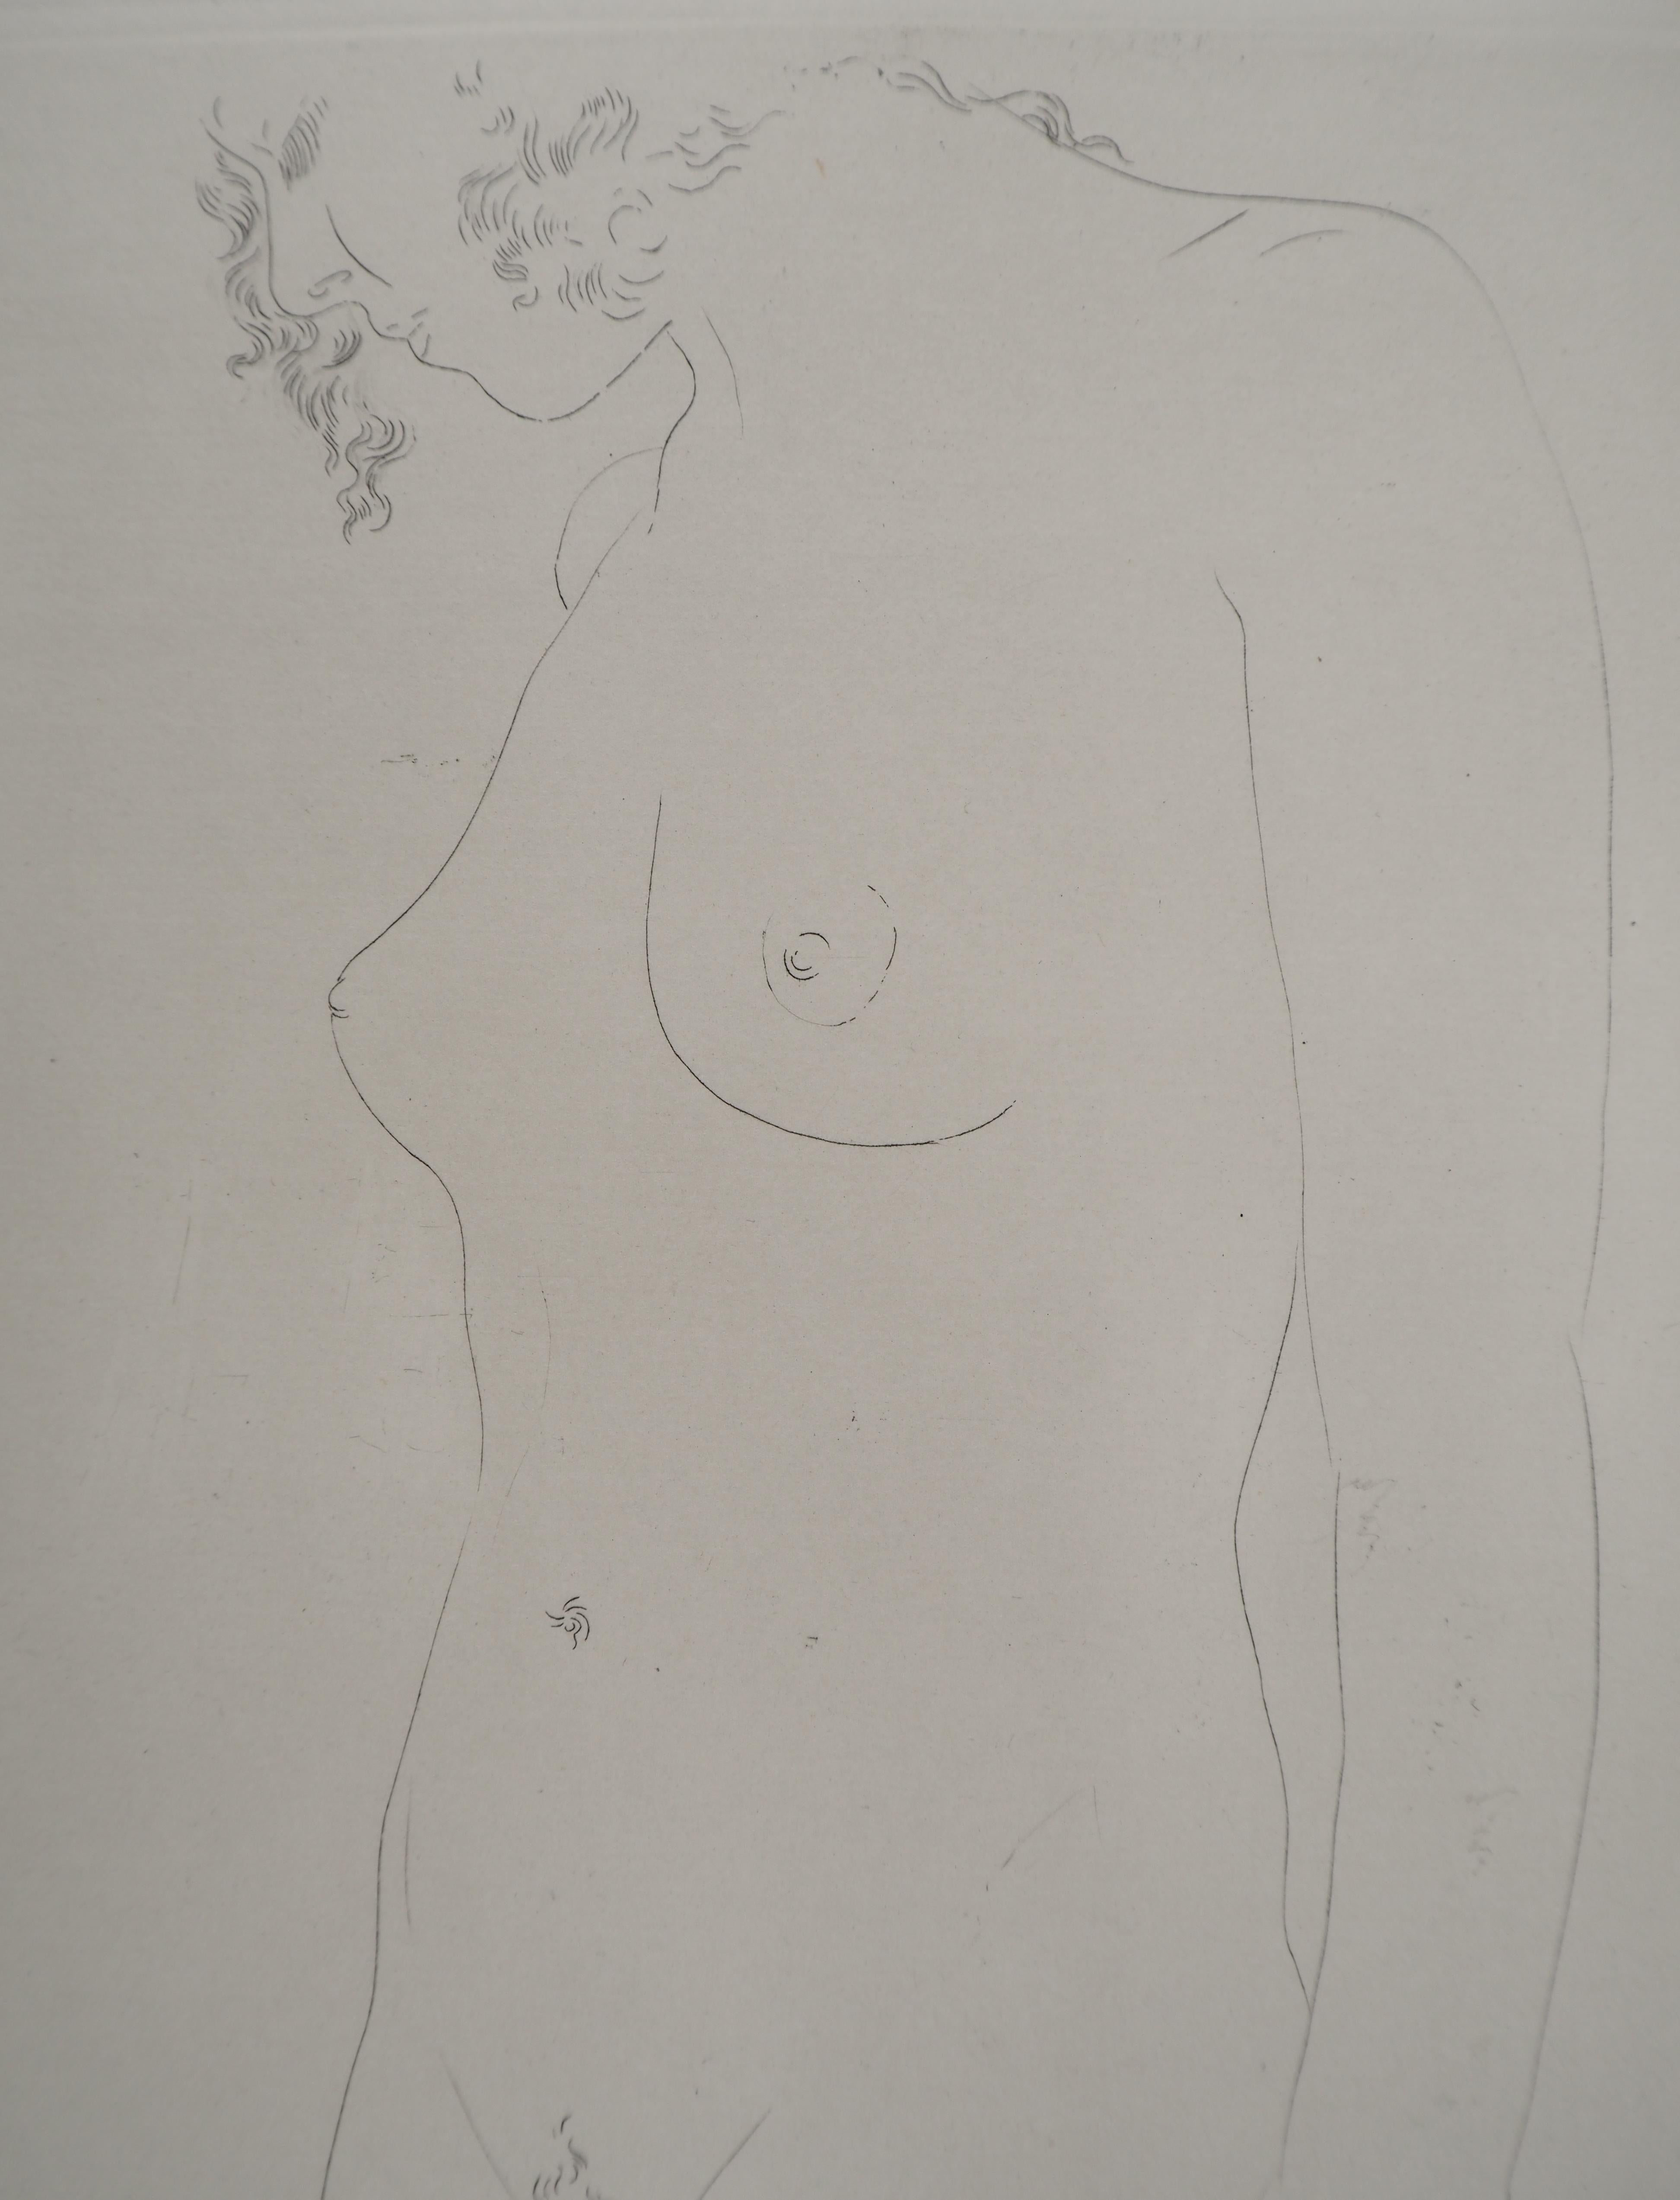 Salvador Dali
Dreaming Nude, 1975

Original etching 
Signed in pencil 
Limited to 100 copies (Here numbered 52)
On Arches vellum 32.5 x 25 cm (c. 12.7 x 9.8 in)

REFERENCES :
- Catalog raisonne Field #34-2
- Catalog raisonne Michler & Lopsinger